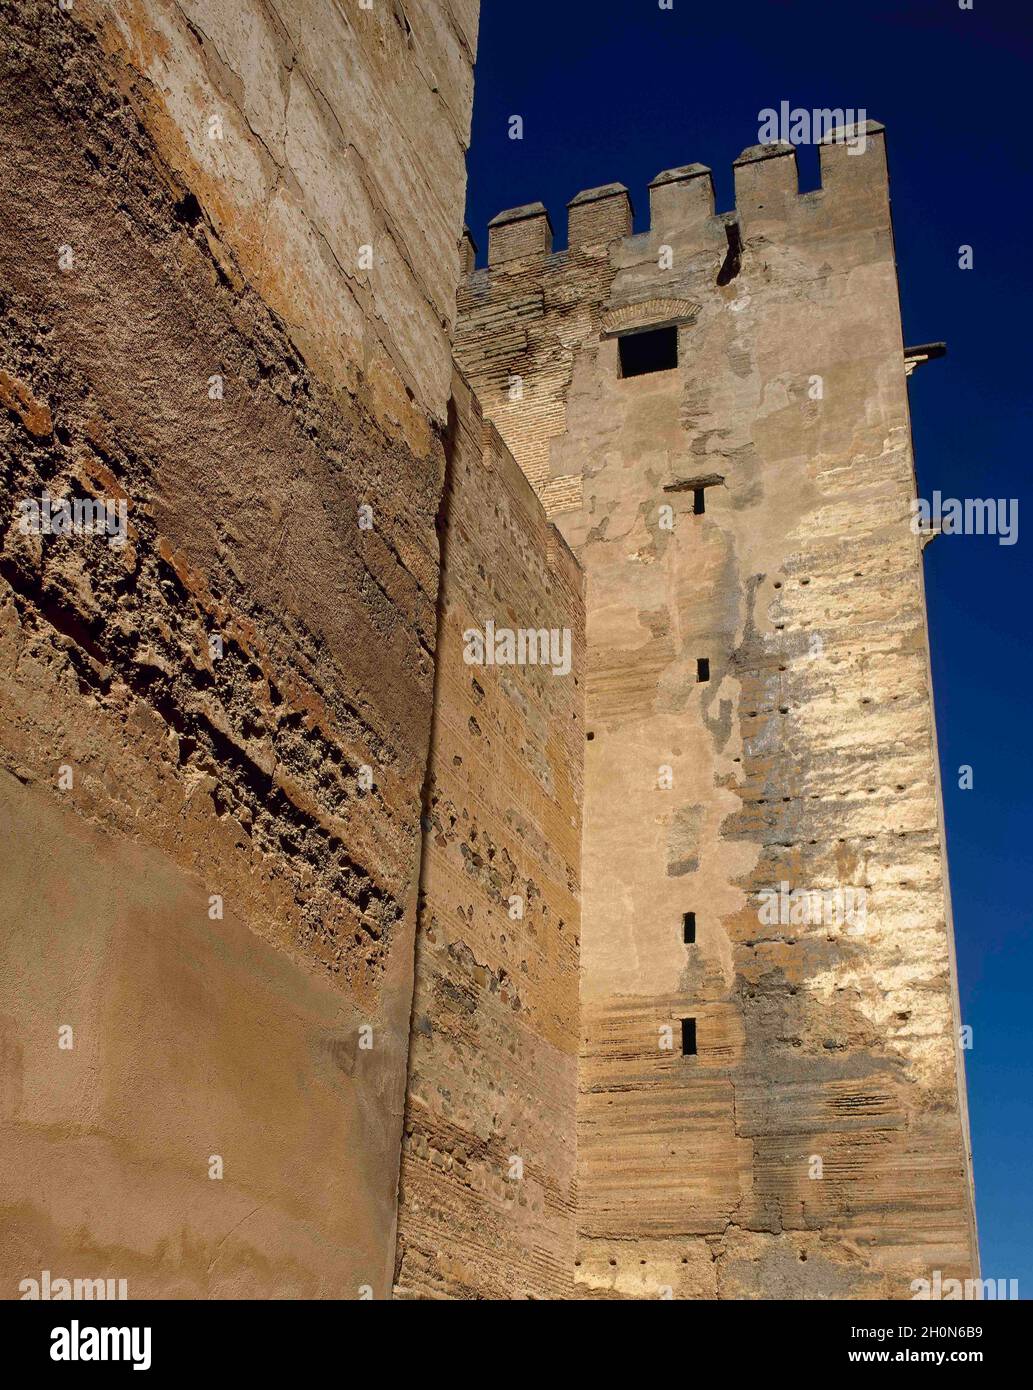 Spain, Andalusia, Granada. The Alhambra. The Alcazaba. The construction of the complex was commissioned by Mohammed I in 1238. The Alcazaba became a r Stock Photo